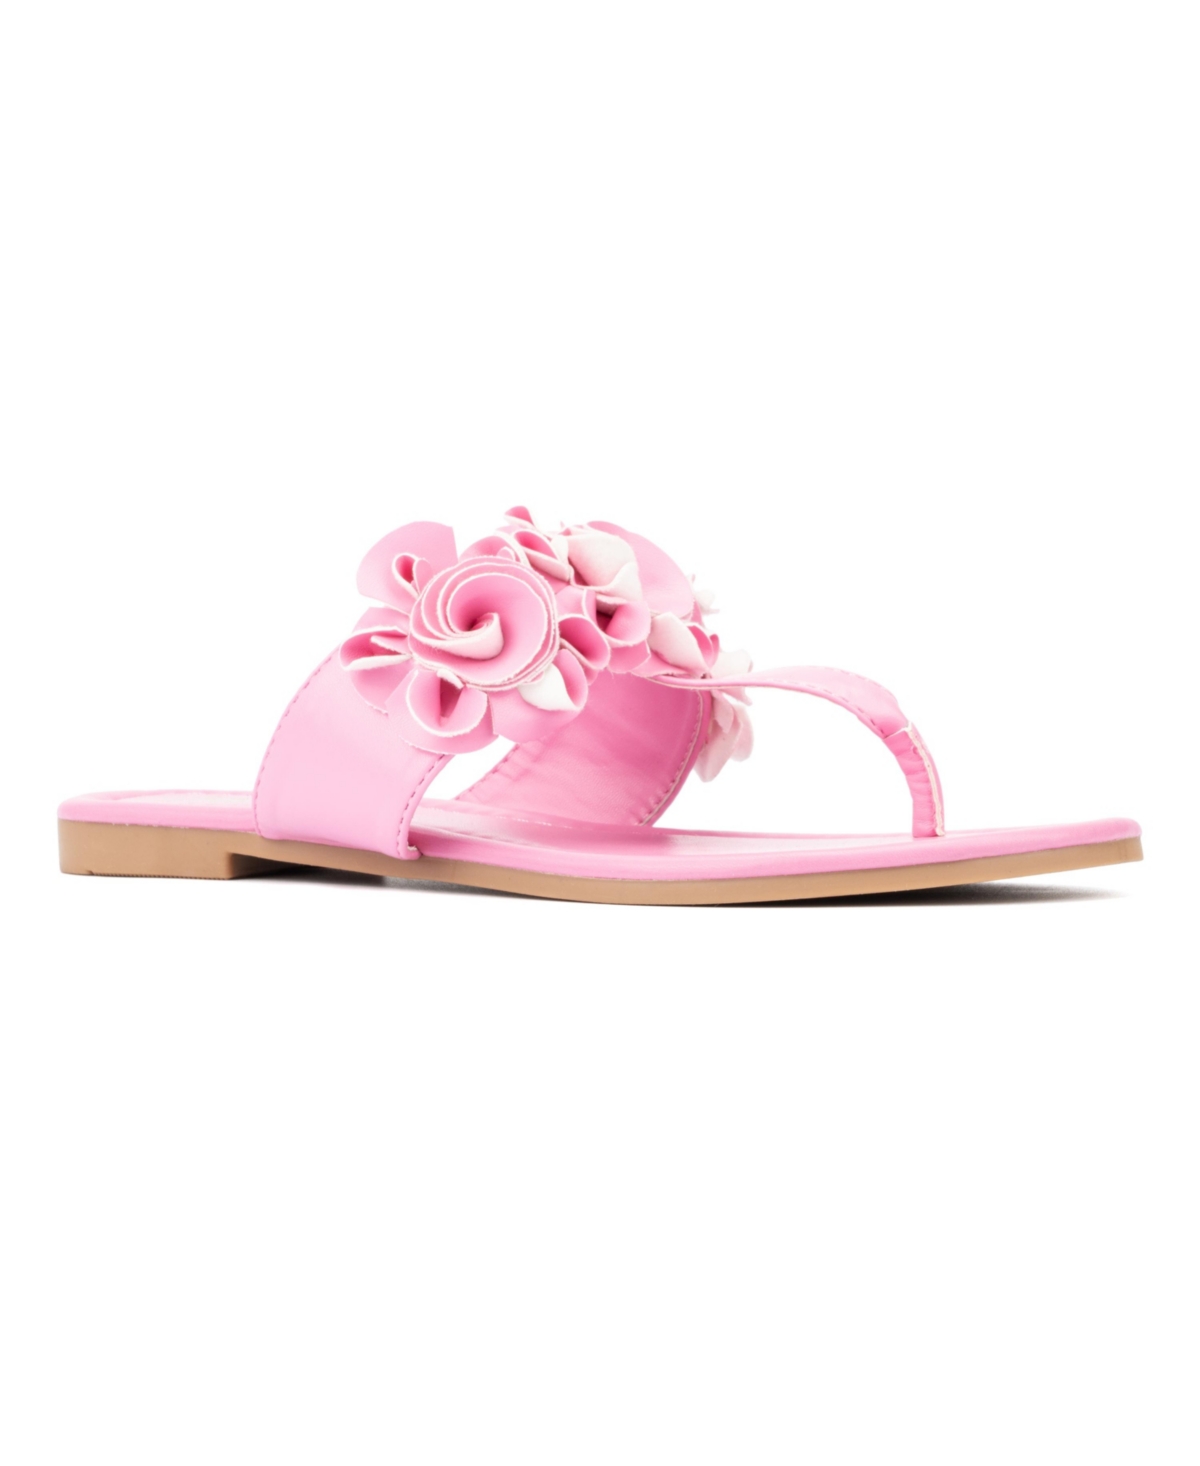 New York And Company New York & Company Women's Liana Flip Flop Sandal In Pink